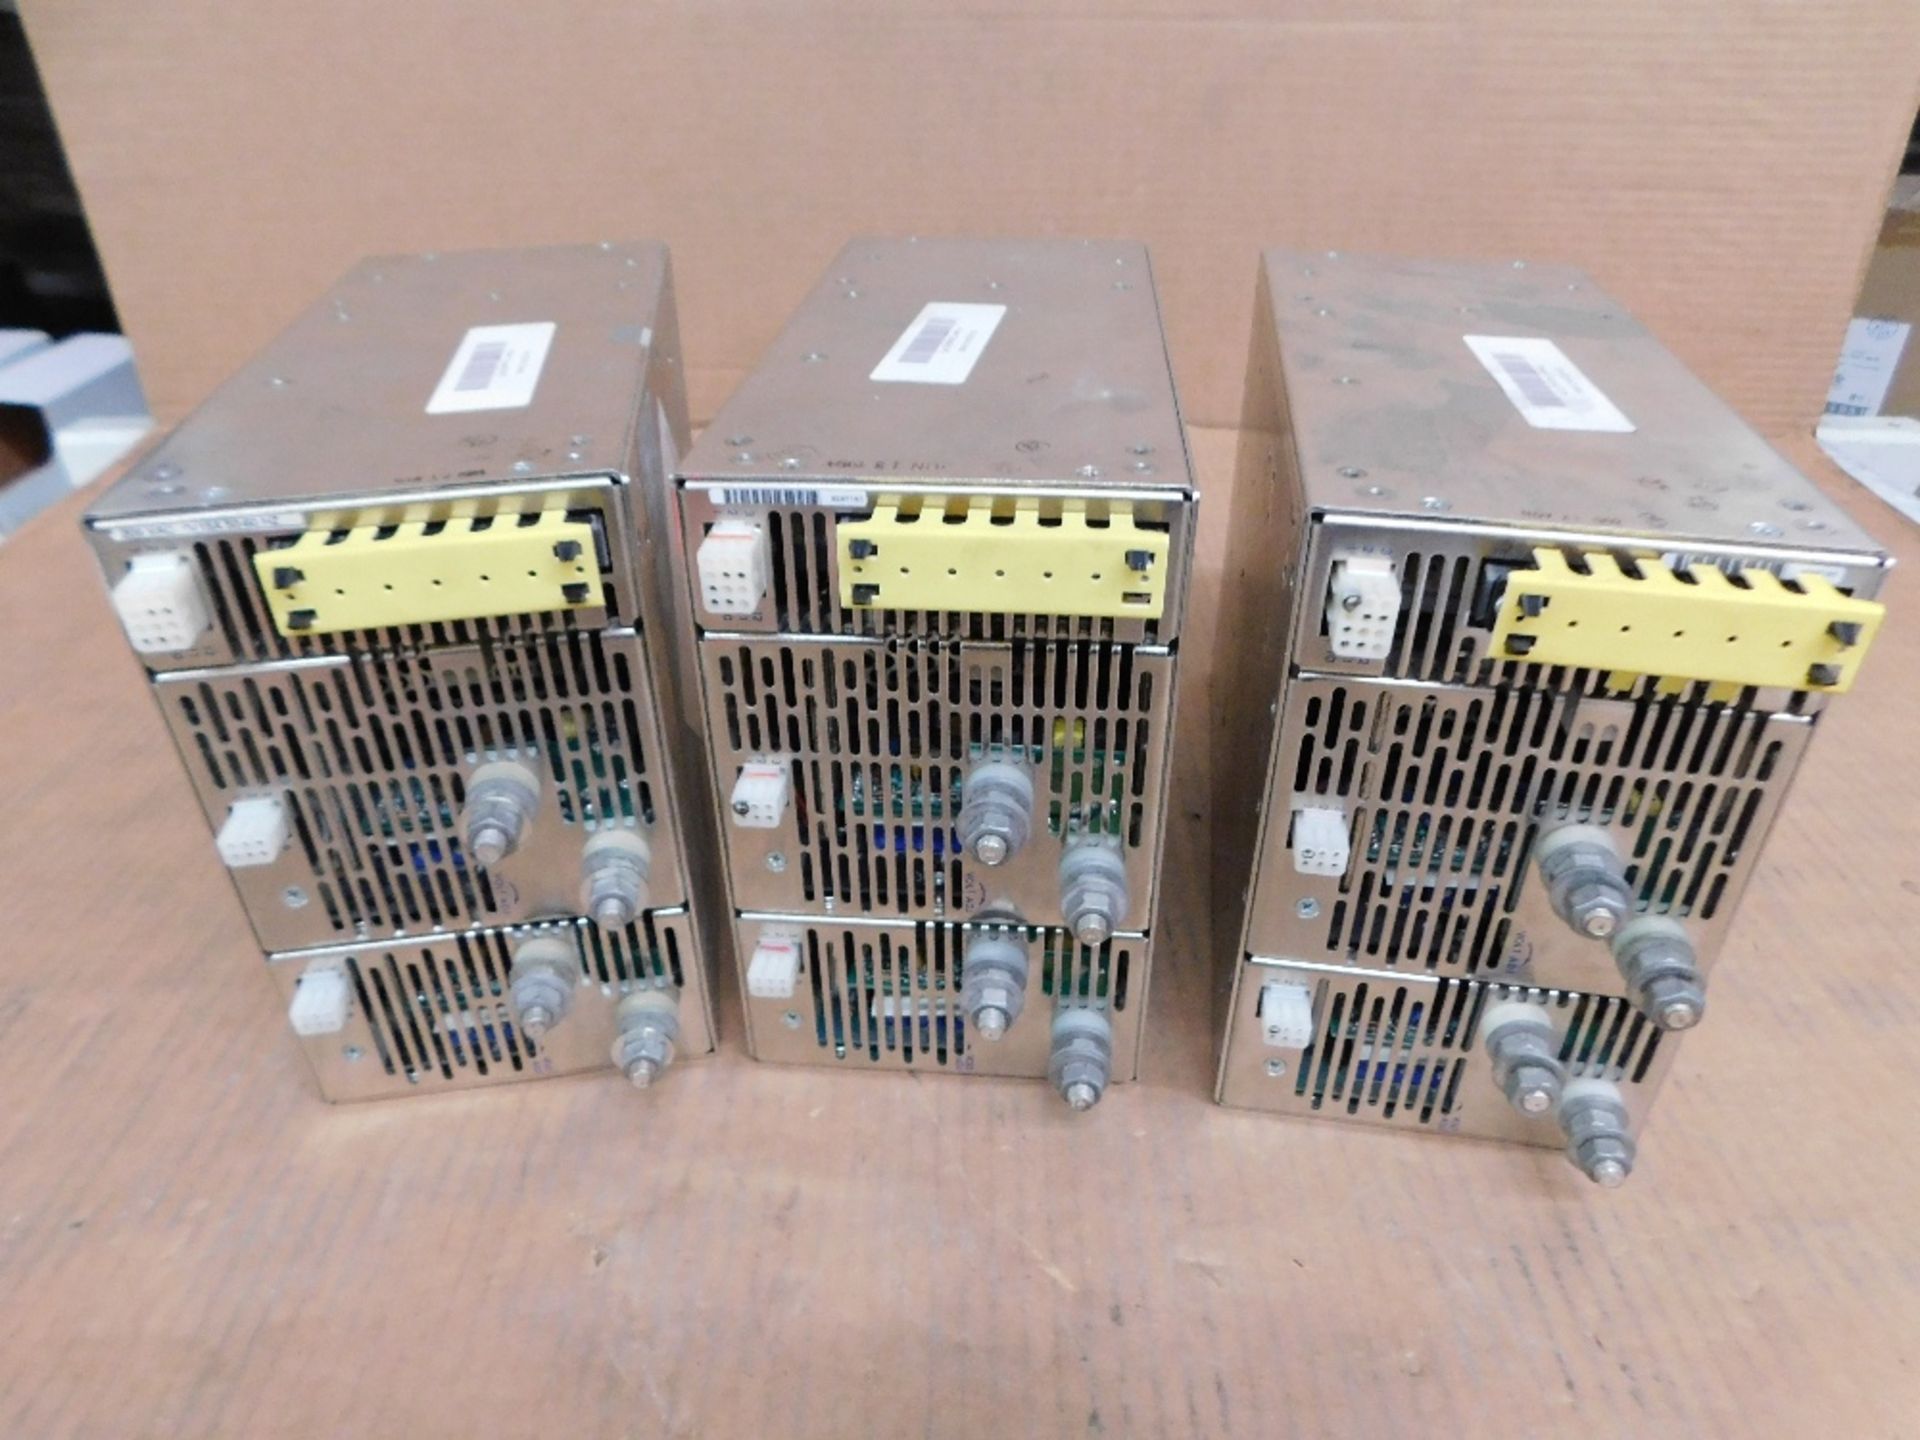 3x Power One New No Box Surplus SF-435442 Other Power Supplies 200A 5VDC